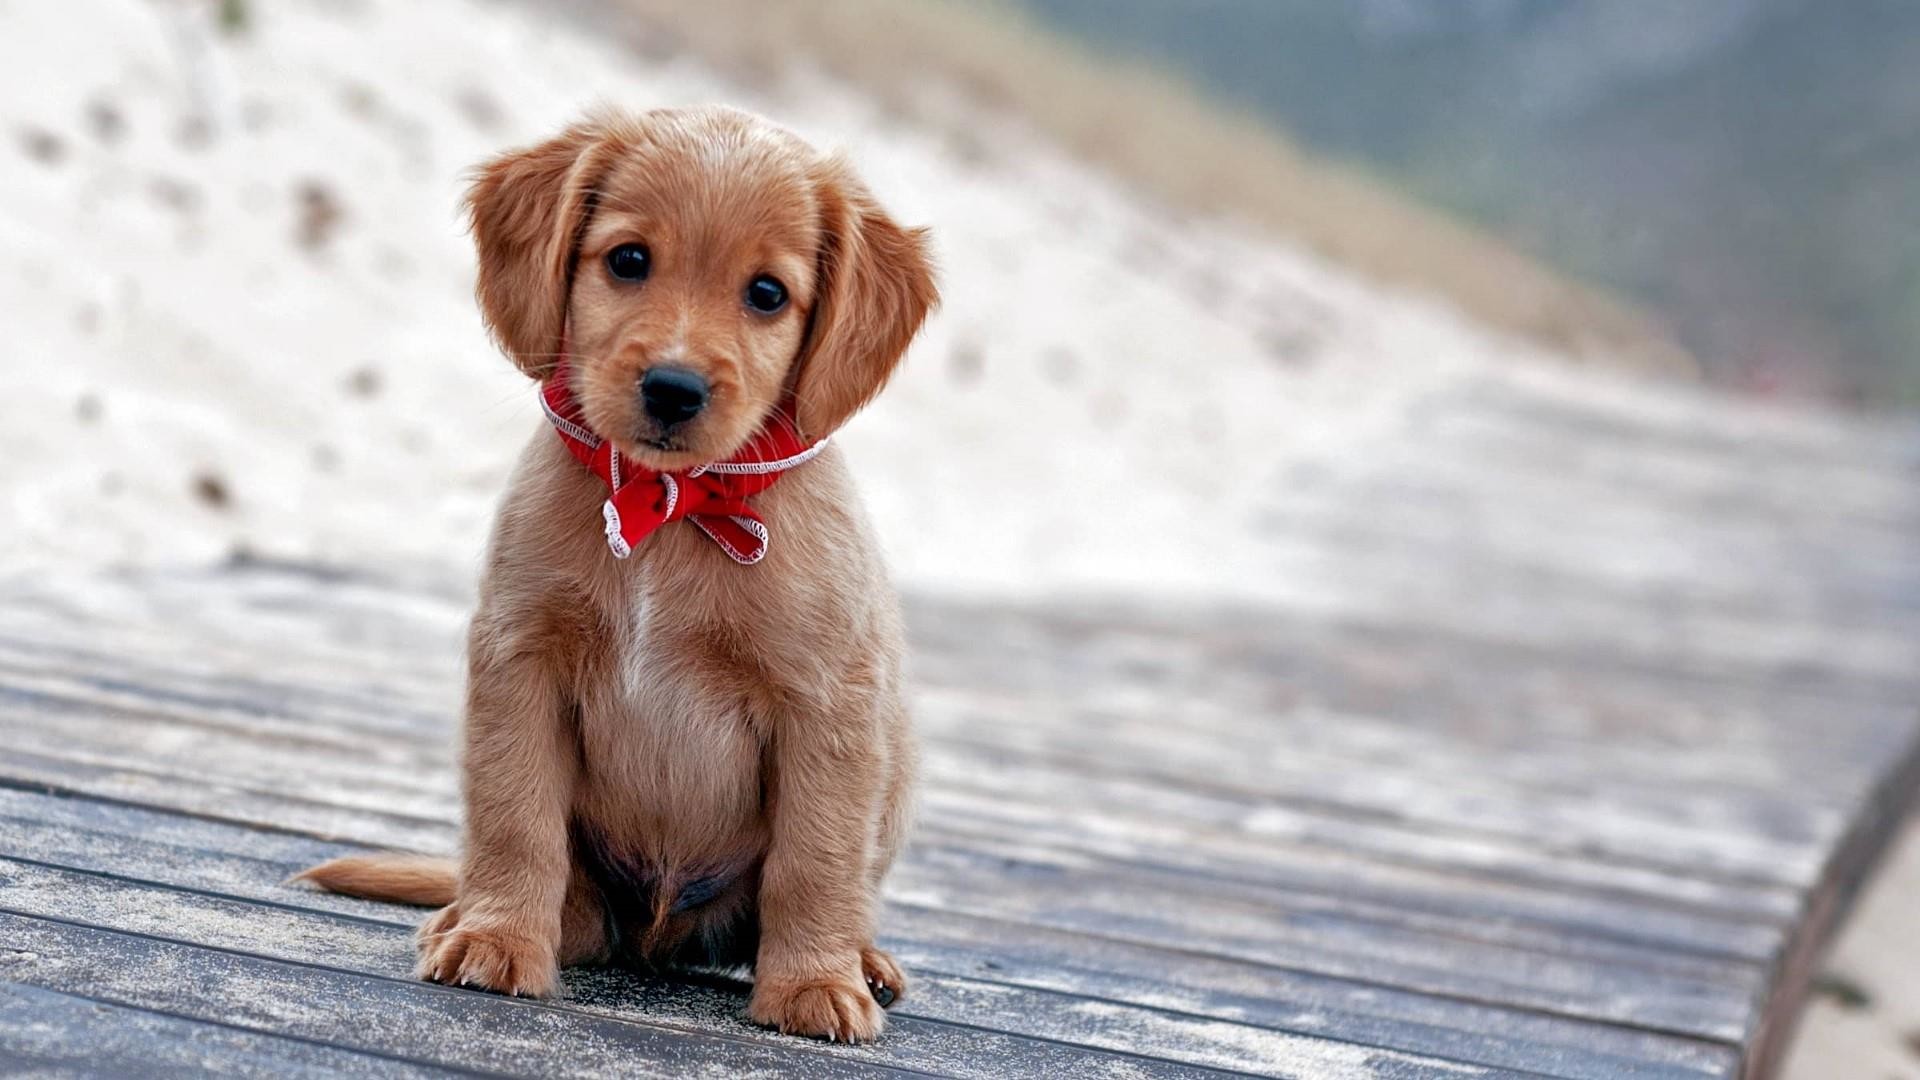  Cute  Puppy  Pictures Wallpaper    WallpaperTag